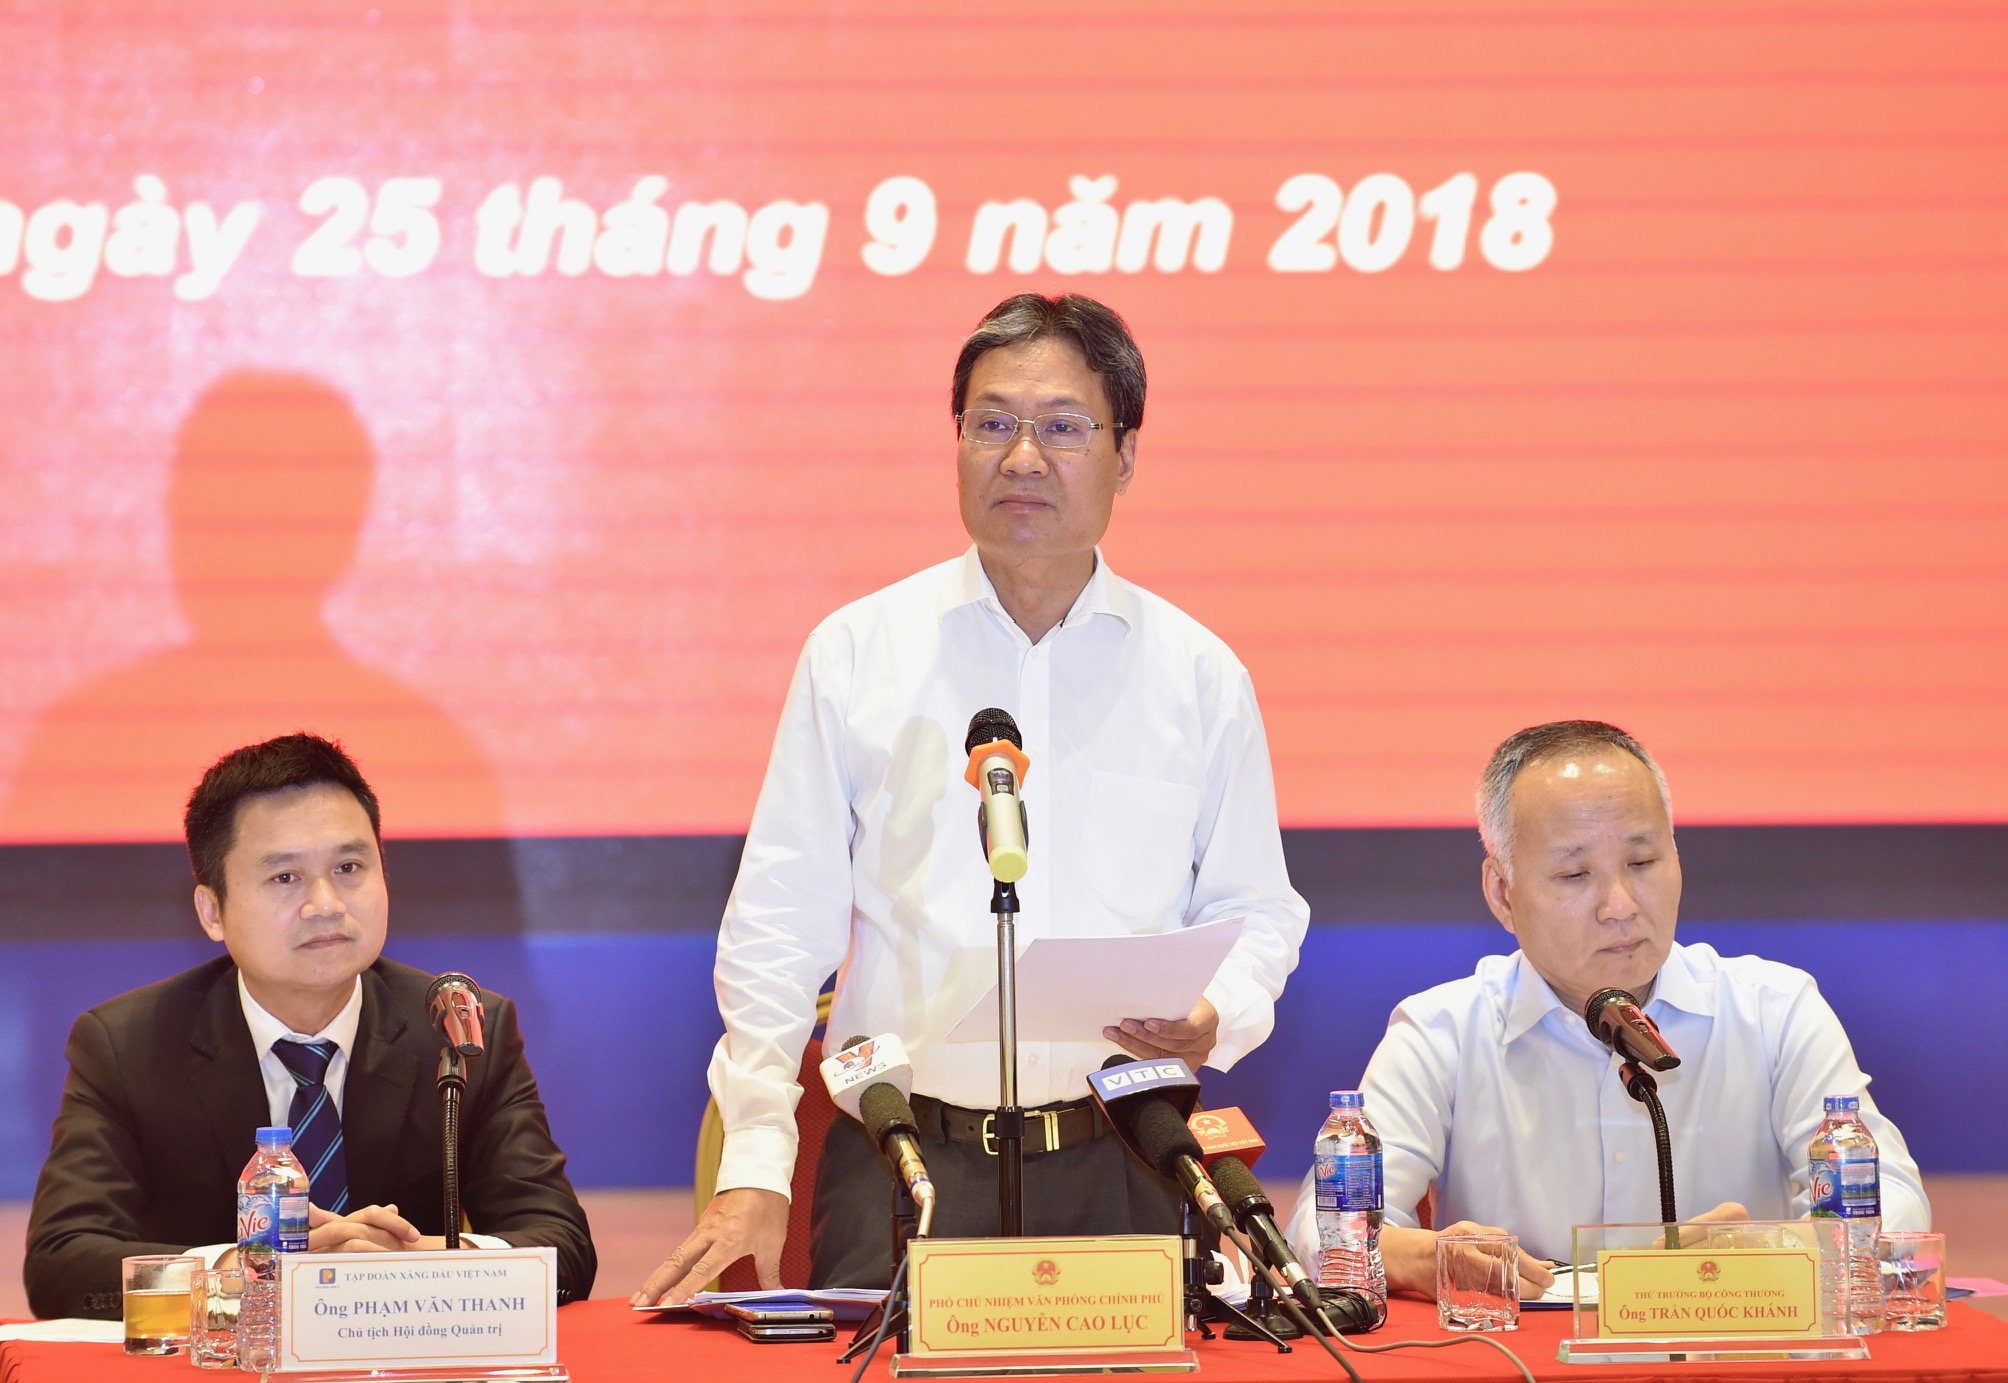 Head of the working group of the Prime Minister Nguyen Cao Luc speaks at the working session between government and Petrolimex on September 25, 2018. Photo: VGPnews